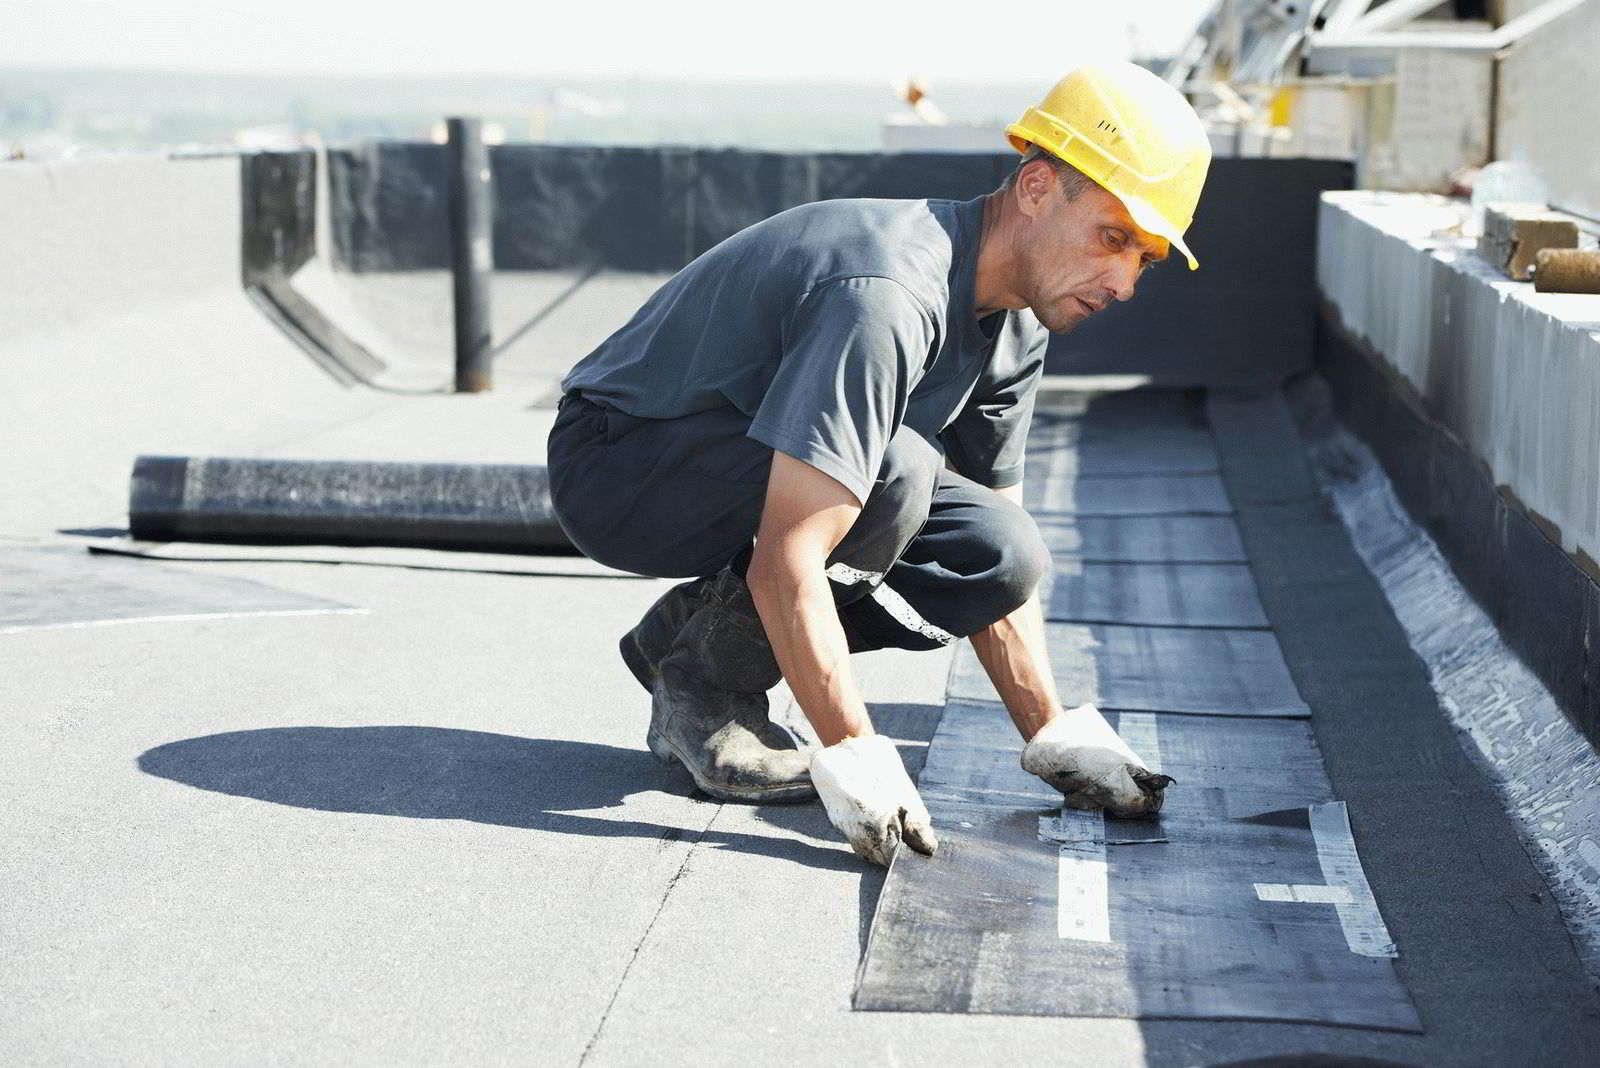 Ranking the best flat roof materials in 2022